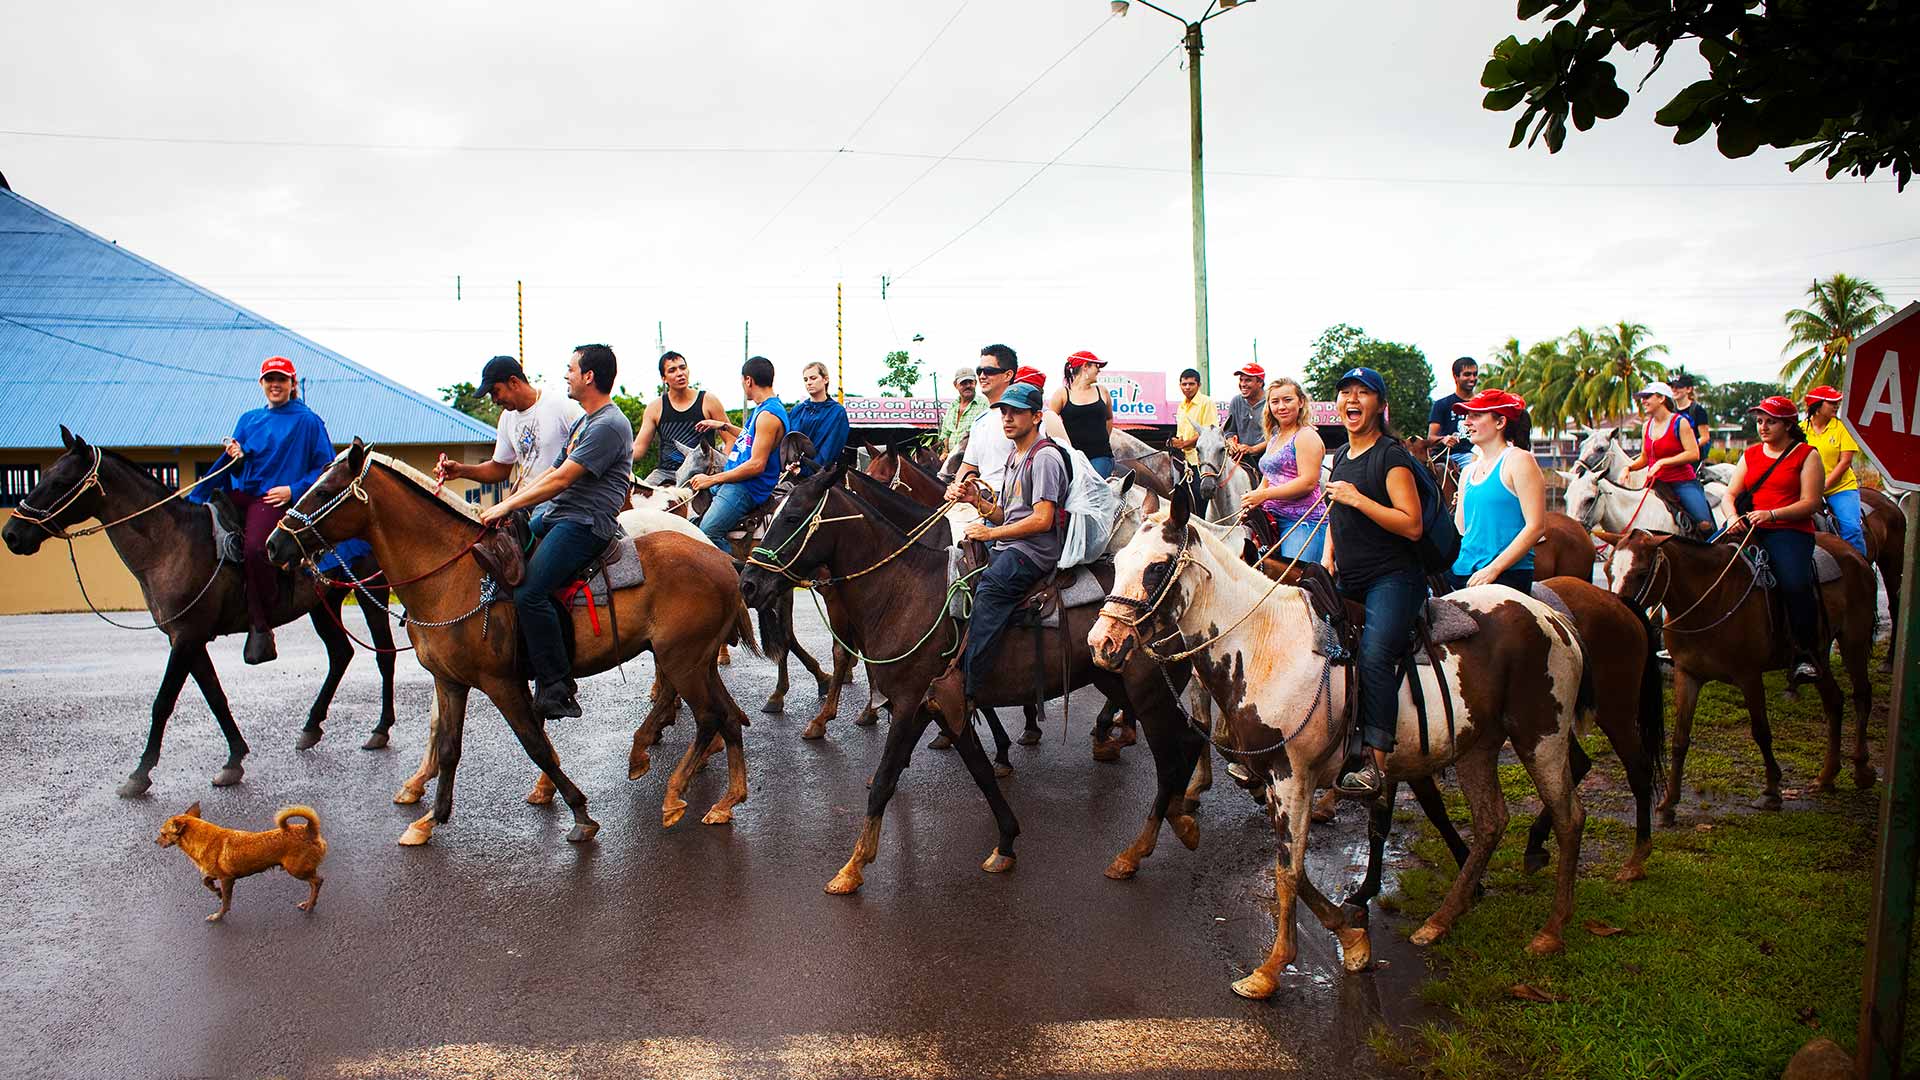 Students abroad ride horses through a Costa Rican town.